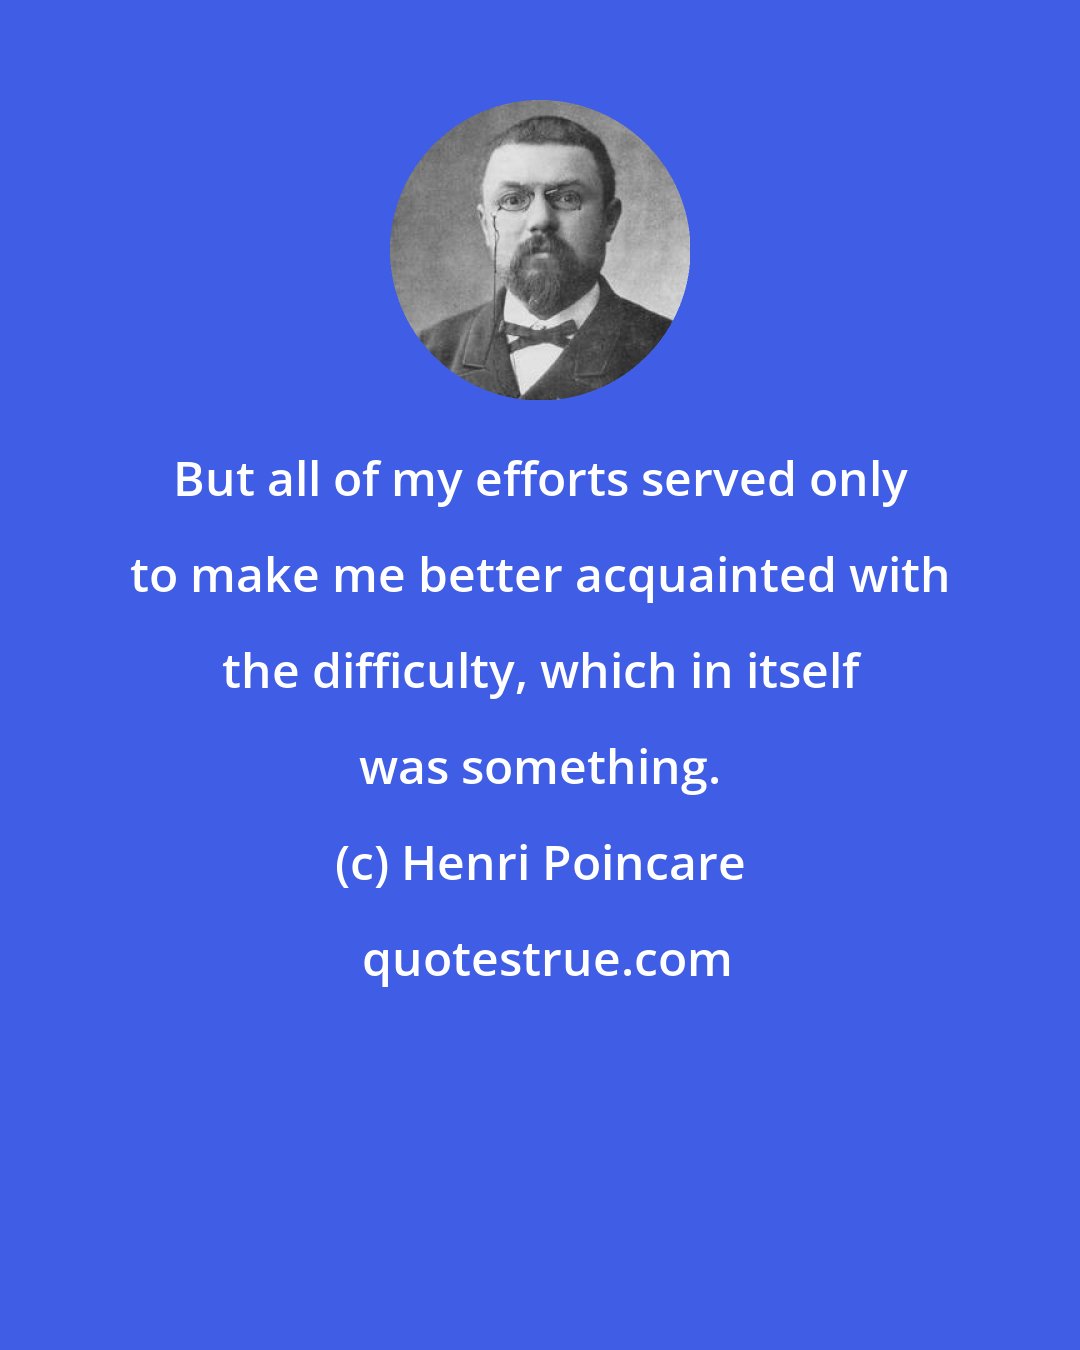 Henri Poincare: But all of my efforts served only to make me better acquainted with the difficulty, which in itself was something.